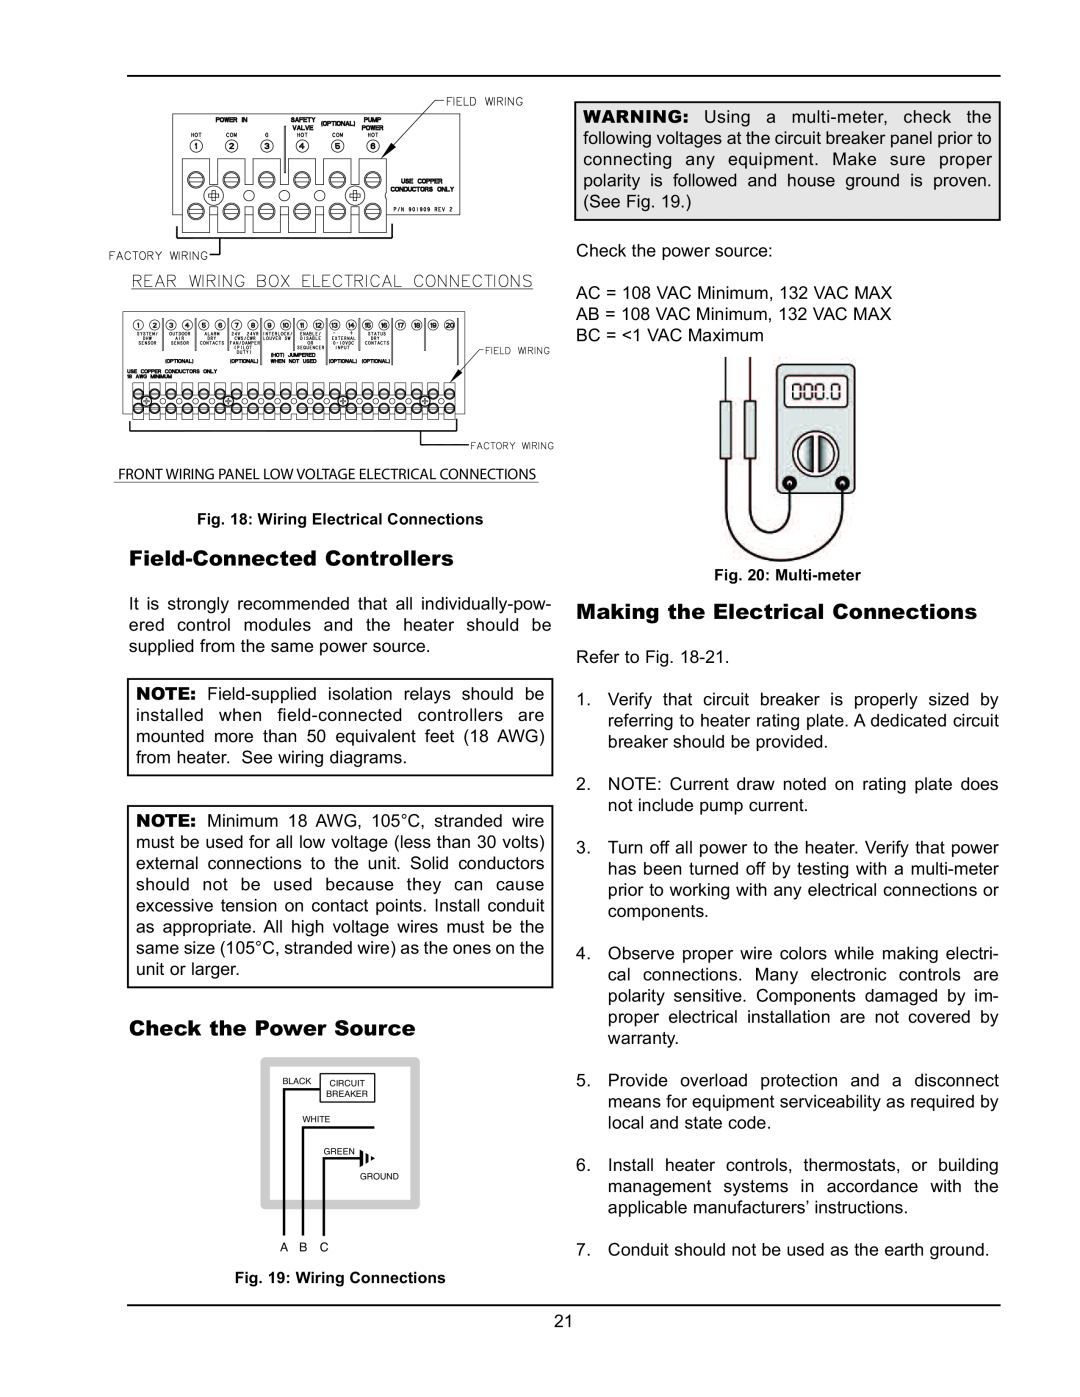 Raypak 5042004 operating instructions Field-ConnectedControllers, Check the Power Source, Making the Electrical Connections 